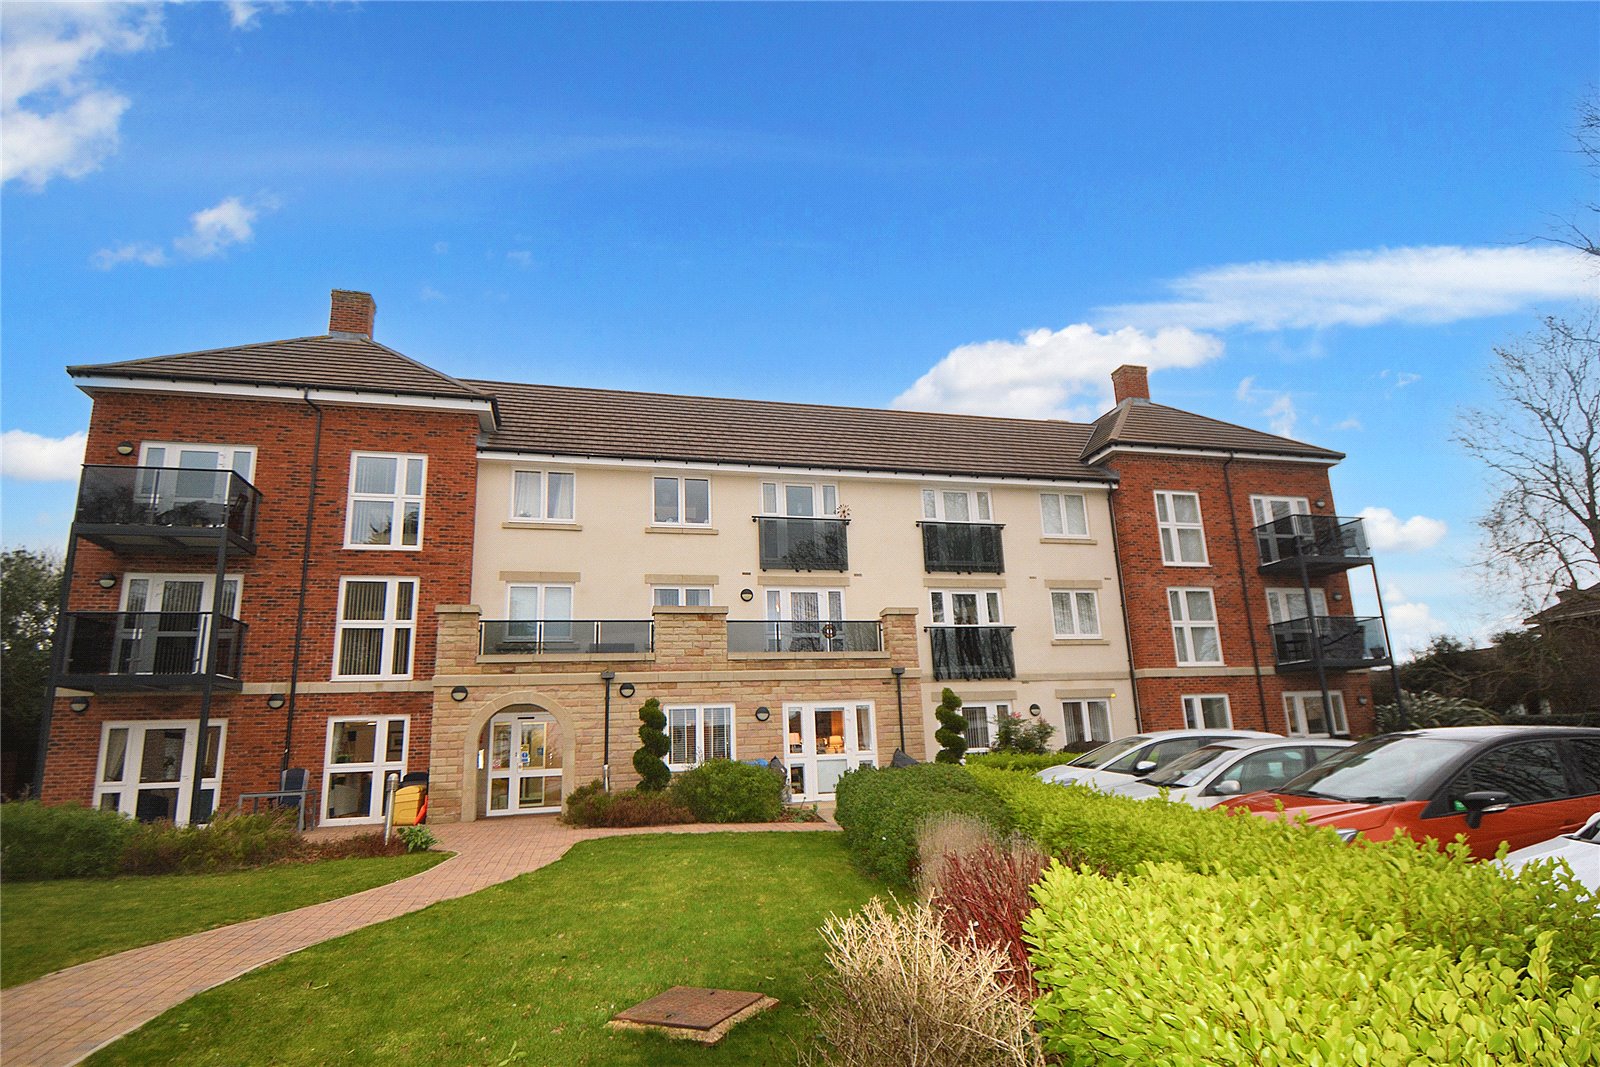 1 bed apartment for sale in Marton Gate, Bridlington - Property Image 1